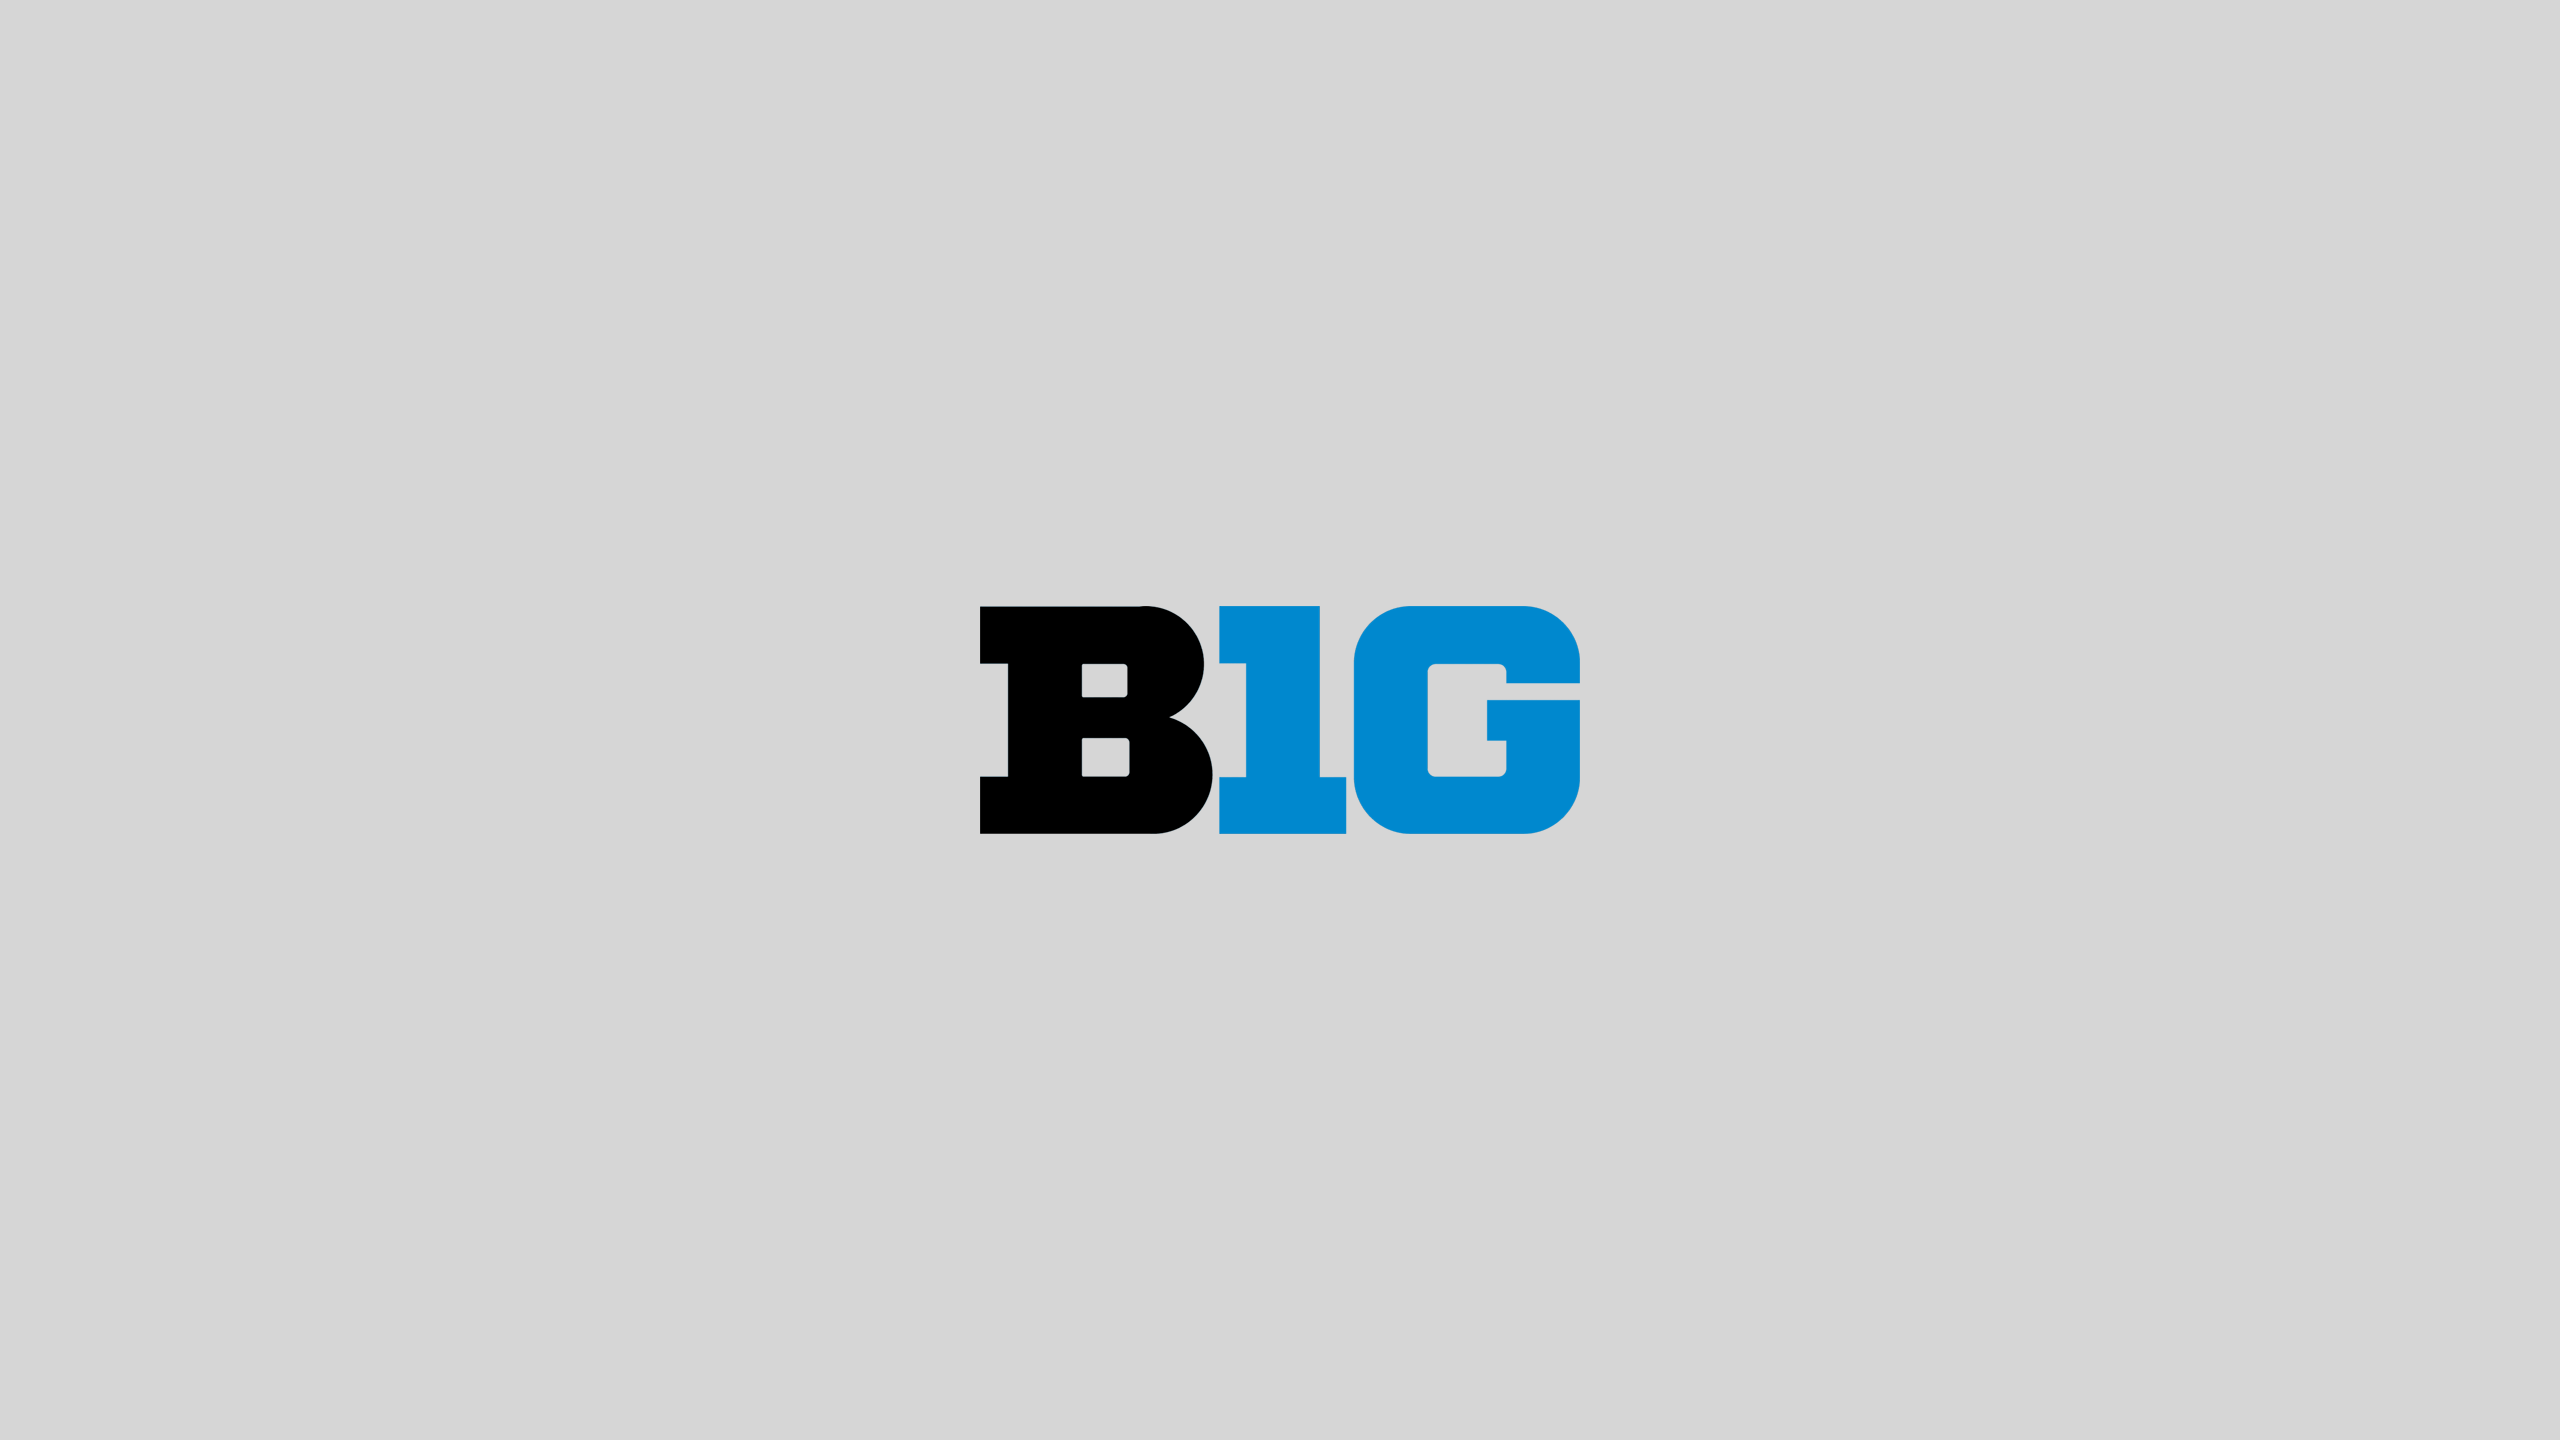 Big Ten Conference - NCAAF - Square Bettor